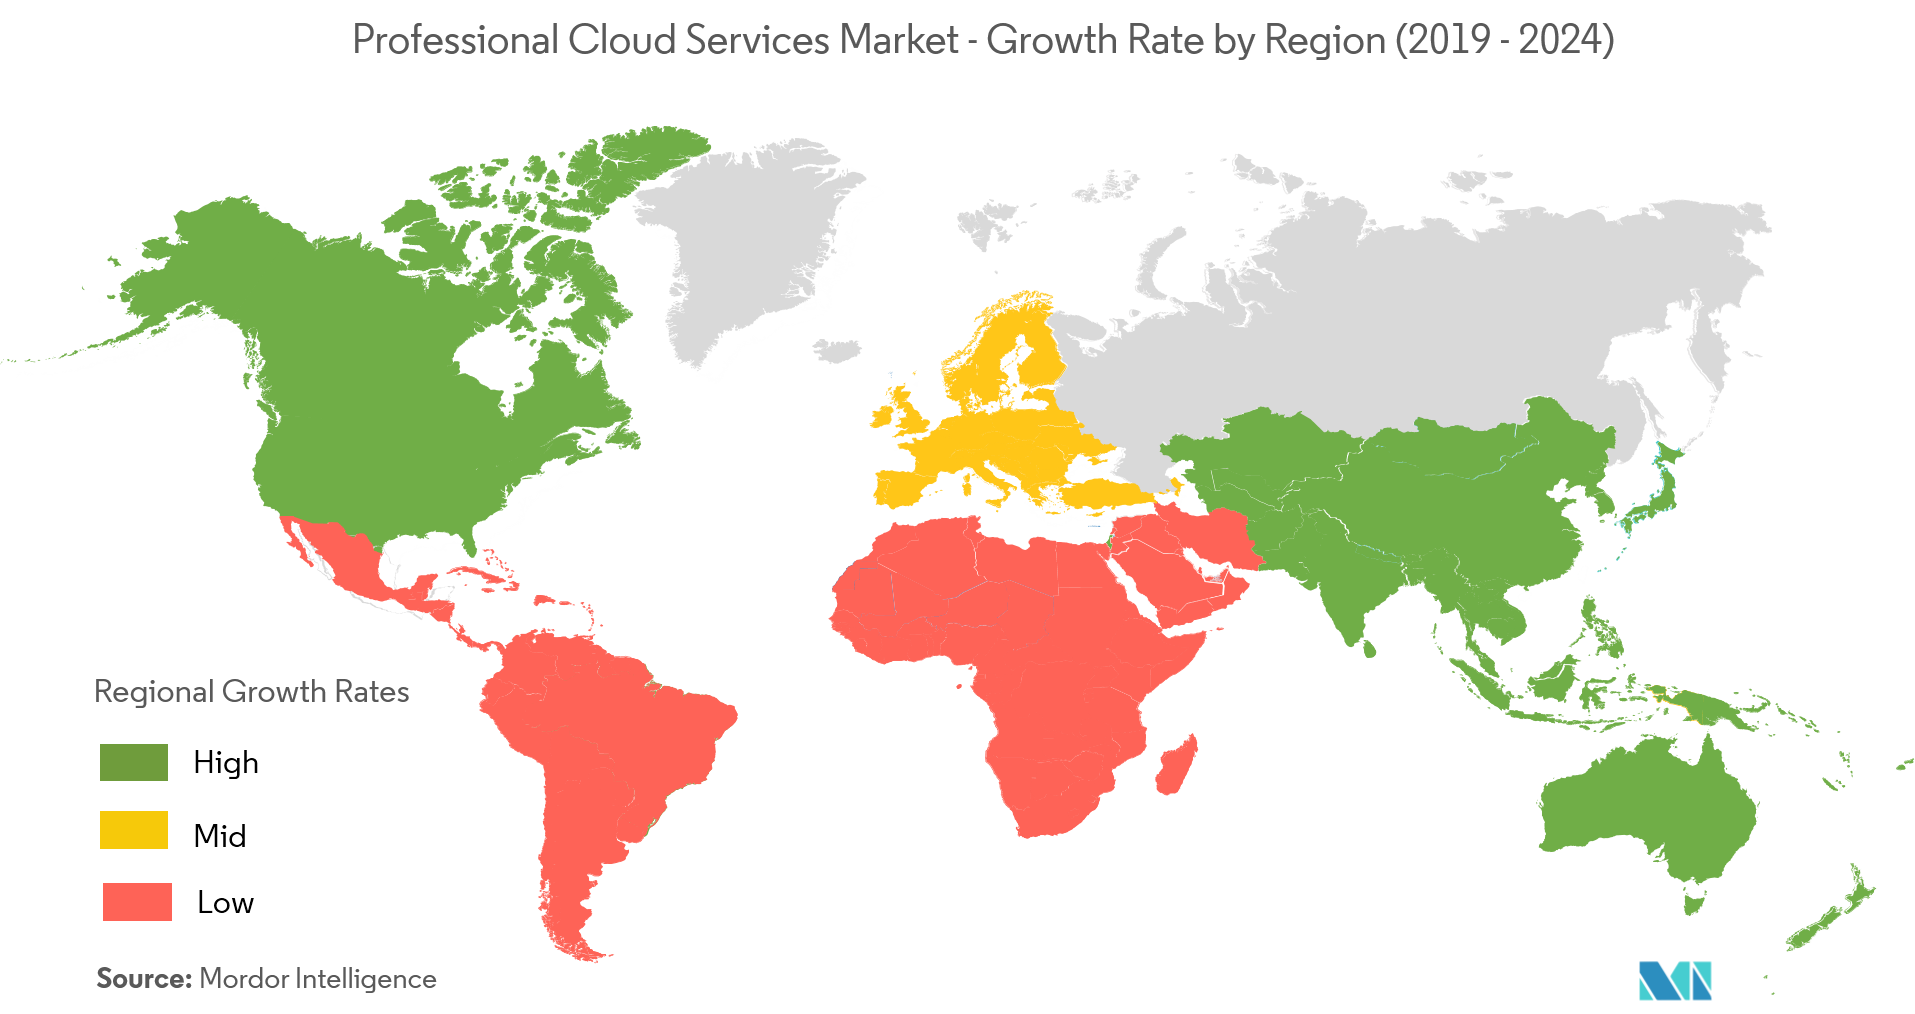 Professional Cloud Services Market Growth by Region